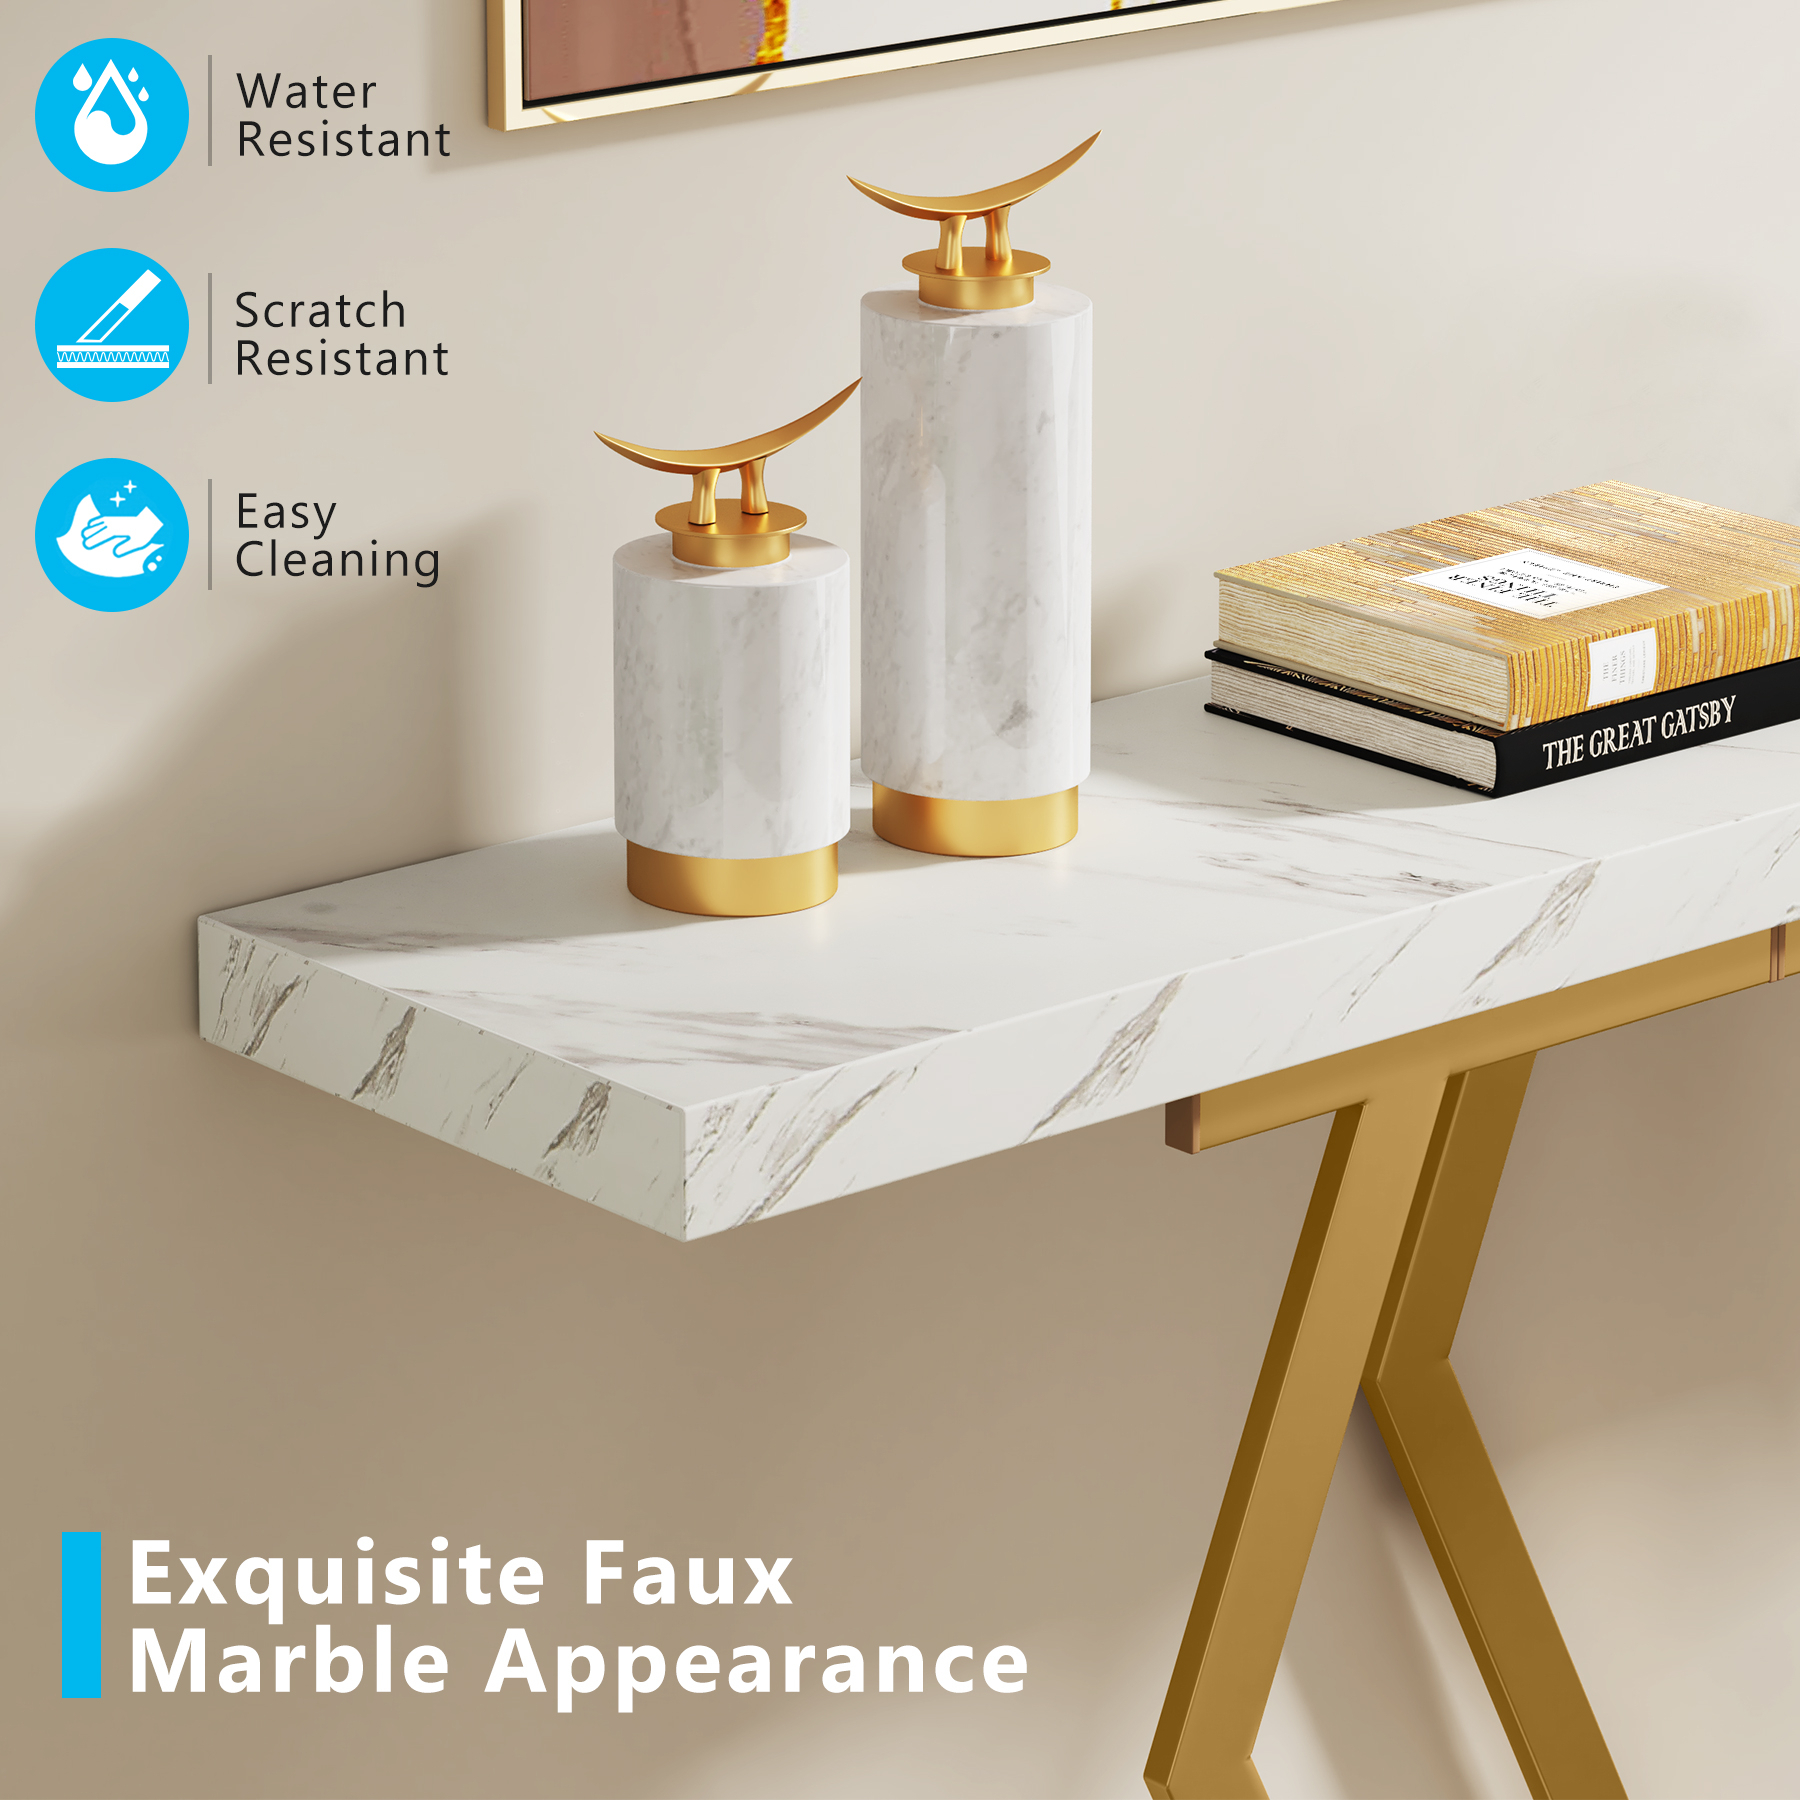 70.9 Extra Long Sofa Table, White And Gold Console Table With Faux Marble Tabletop